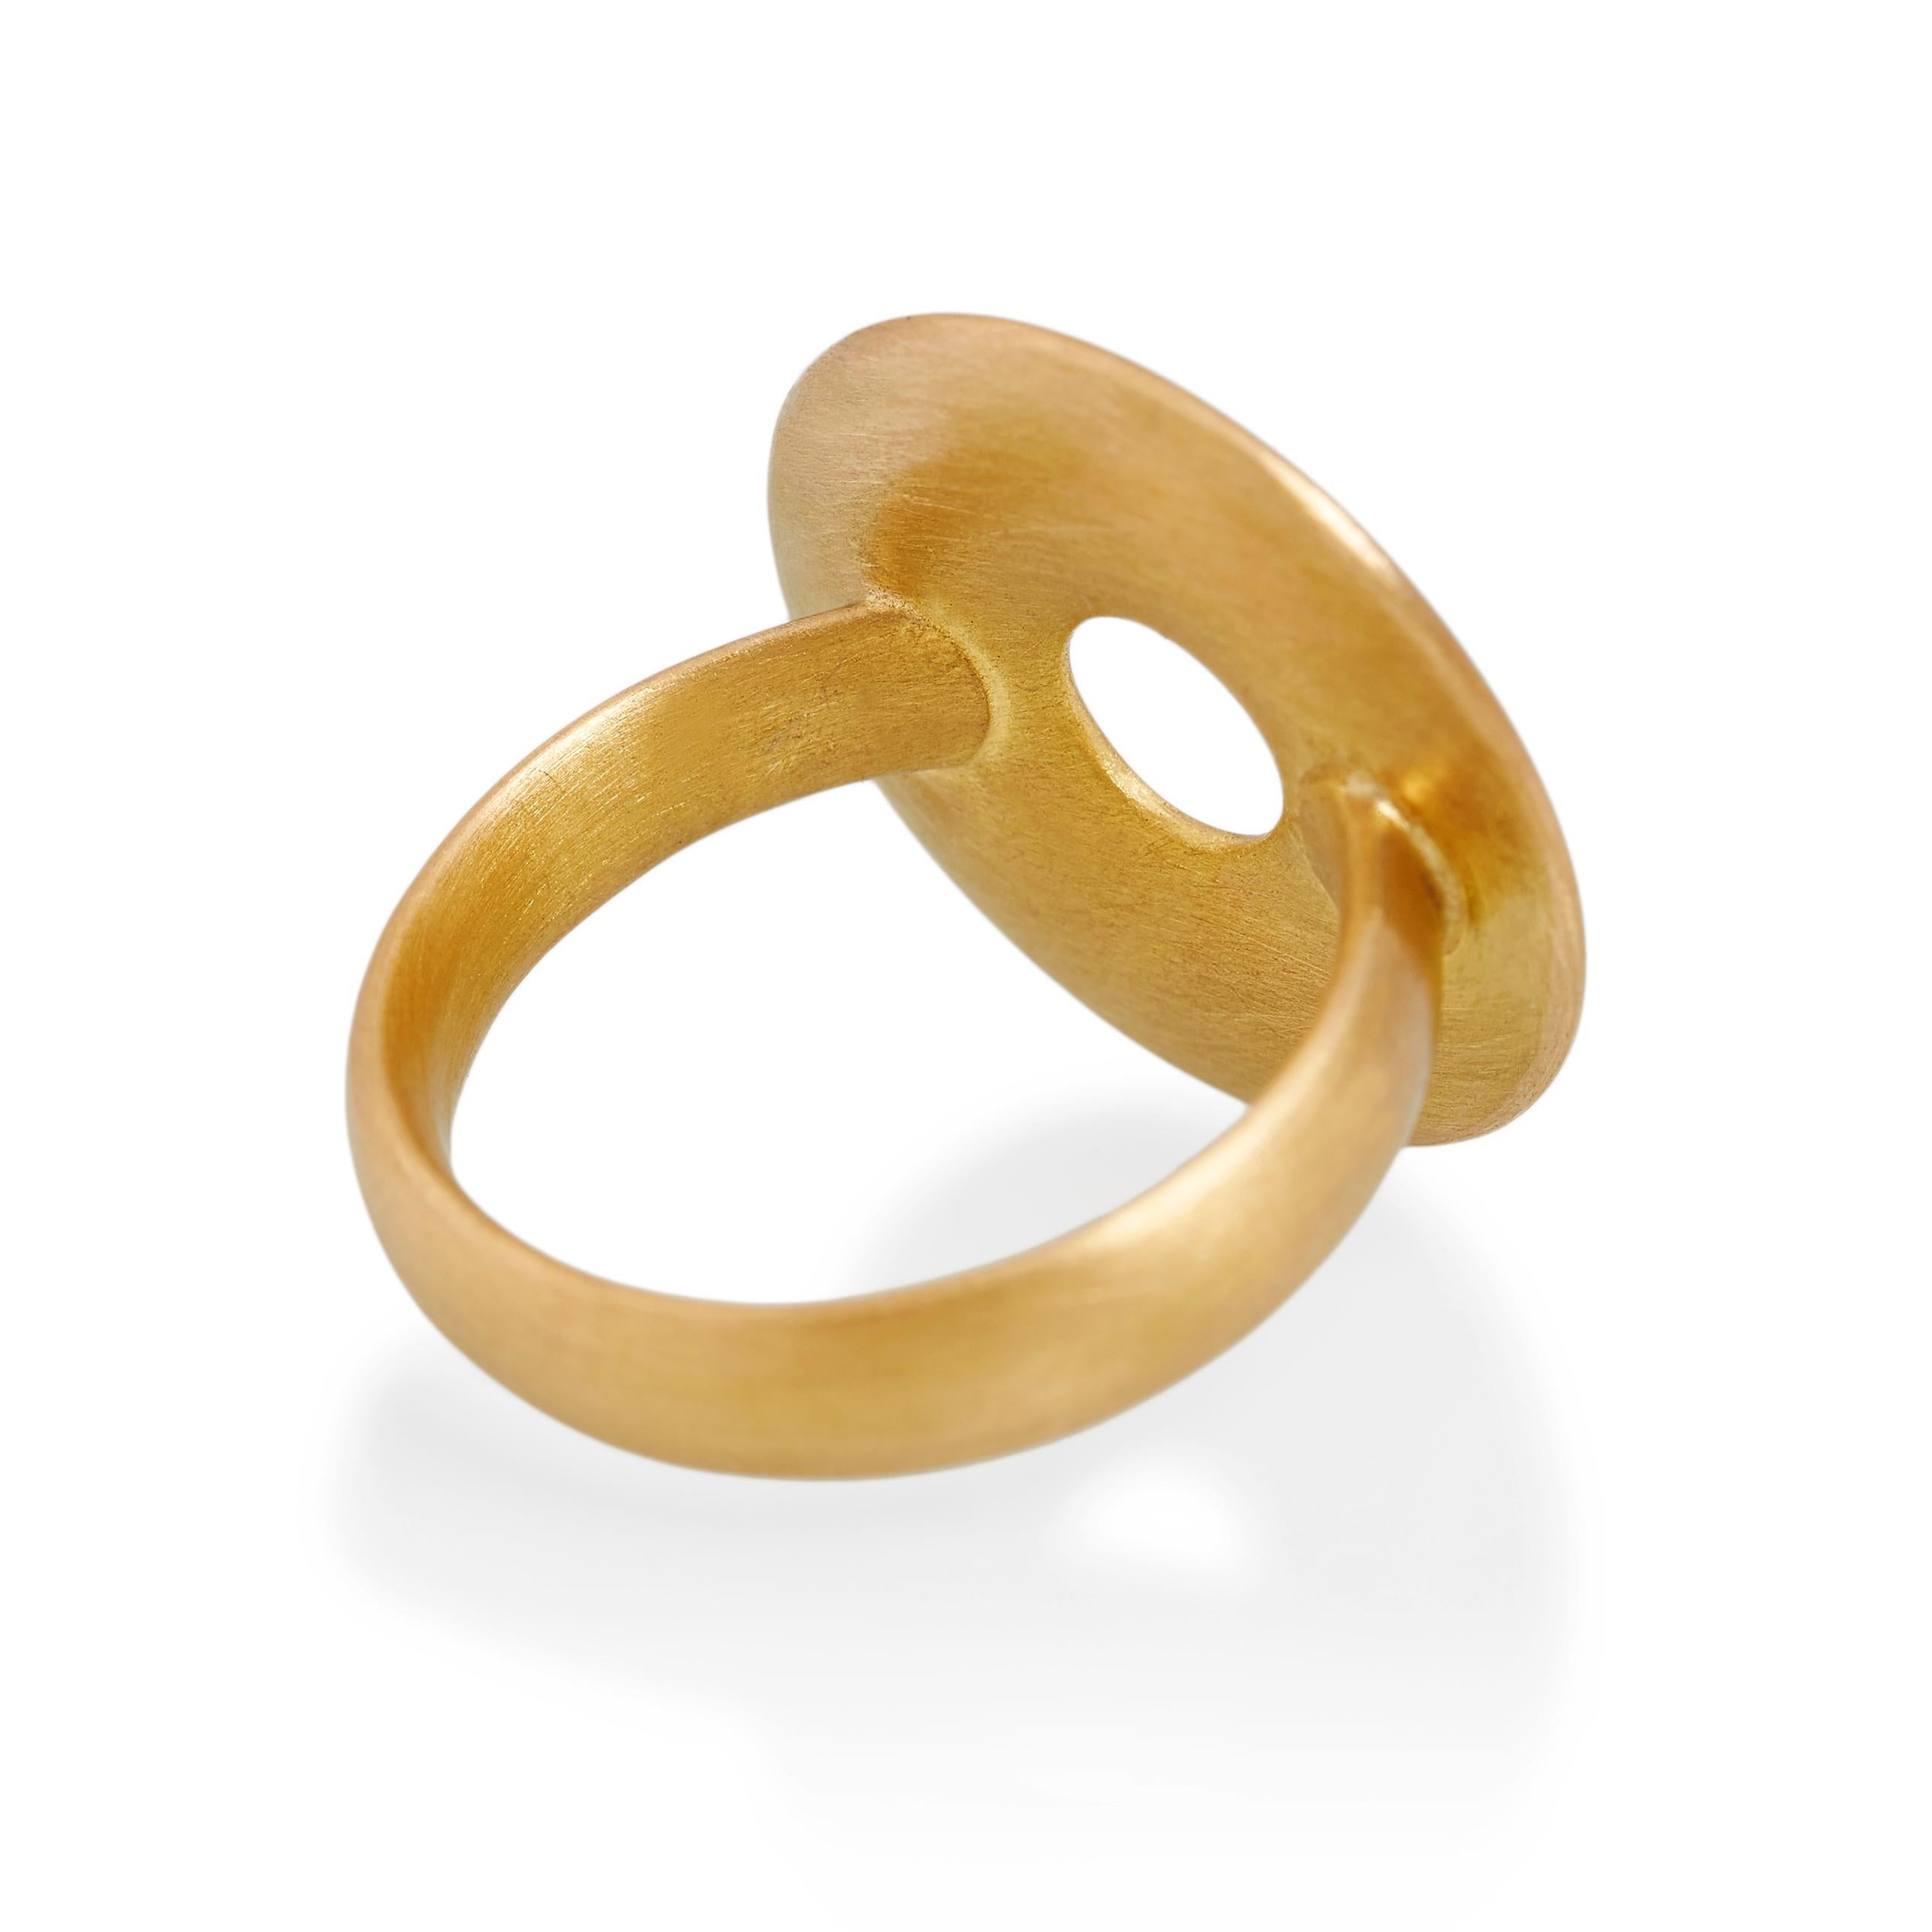 Hand carved large circle ring in solid 22ct gold. Strong contemporary design and a unique take on signet ring. 
ref: S17003

20mm circle diameter  
22ct gold

Cadby & Co are a family business that specialise in reusing & up cycling old cut diamonds